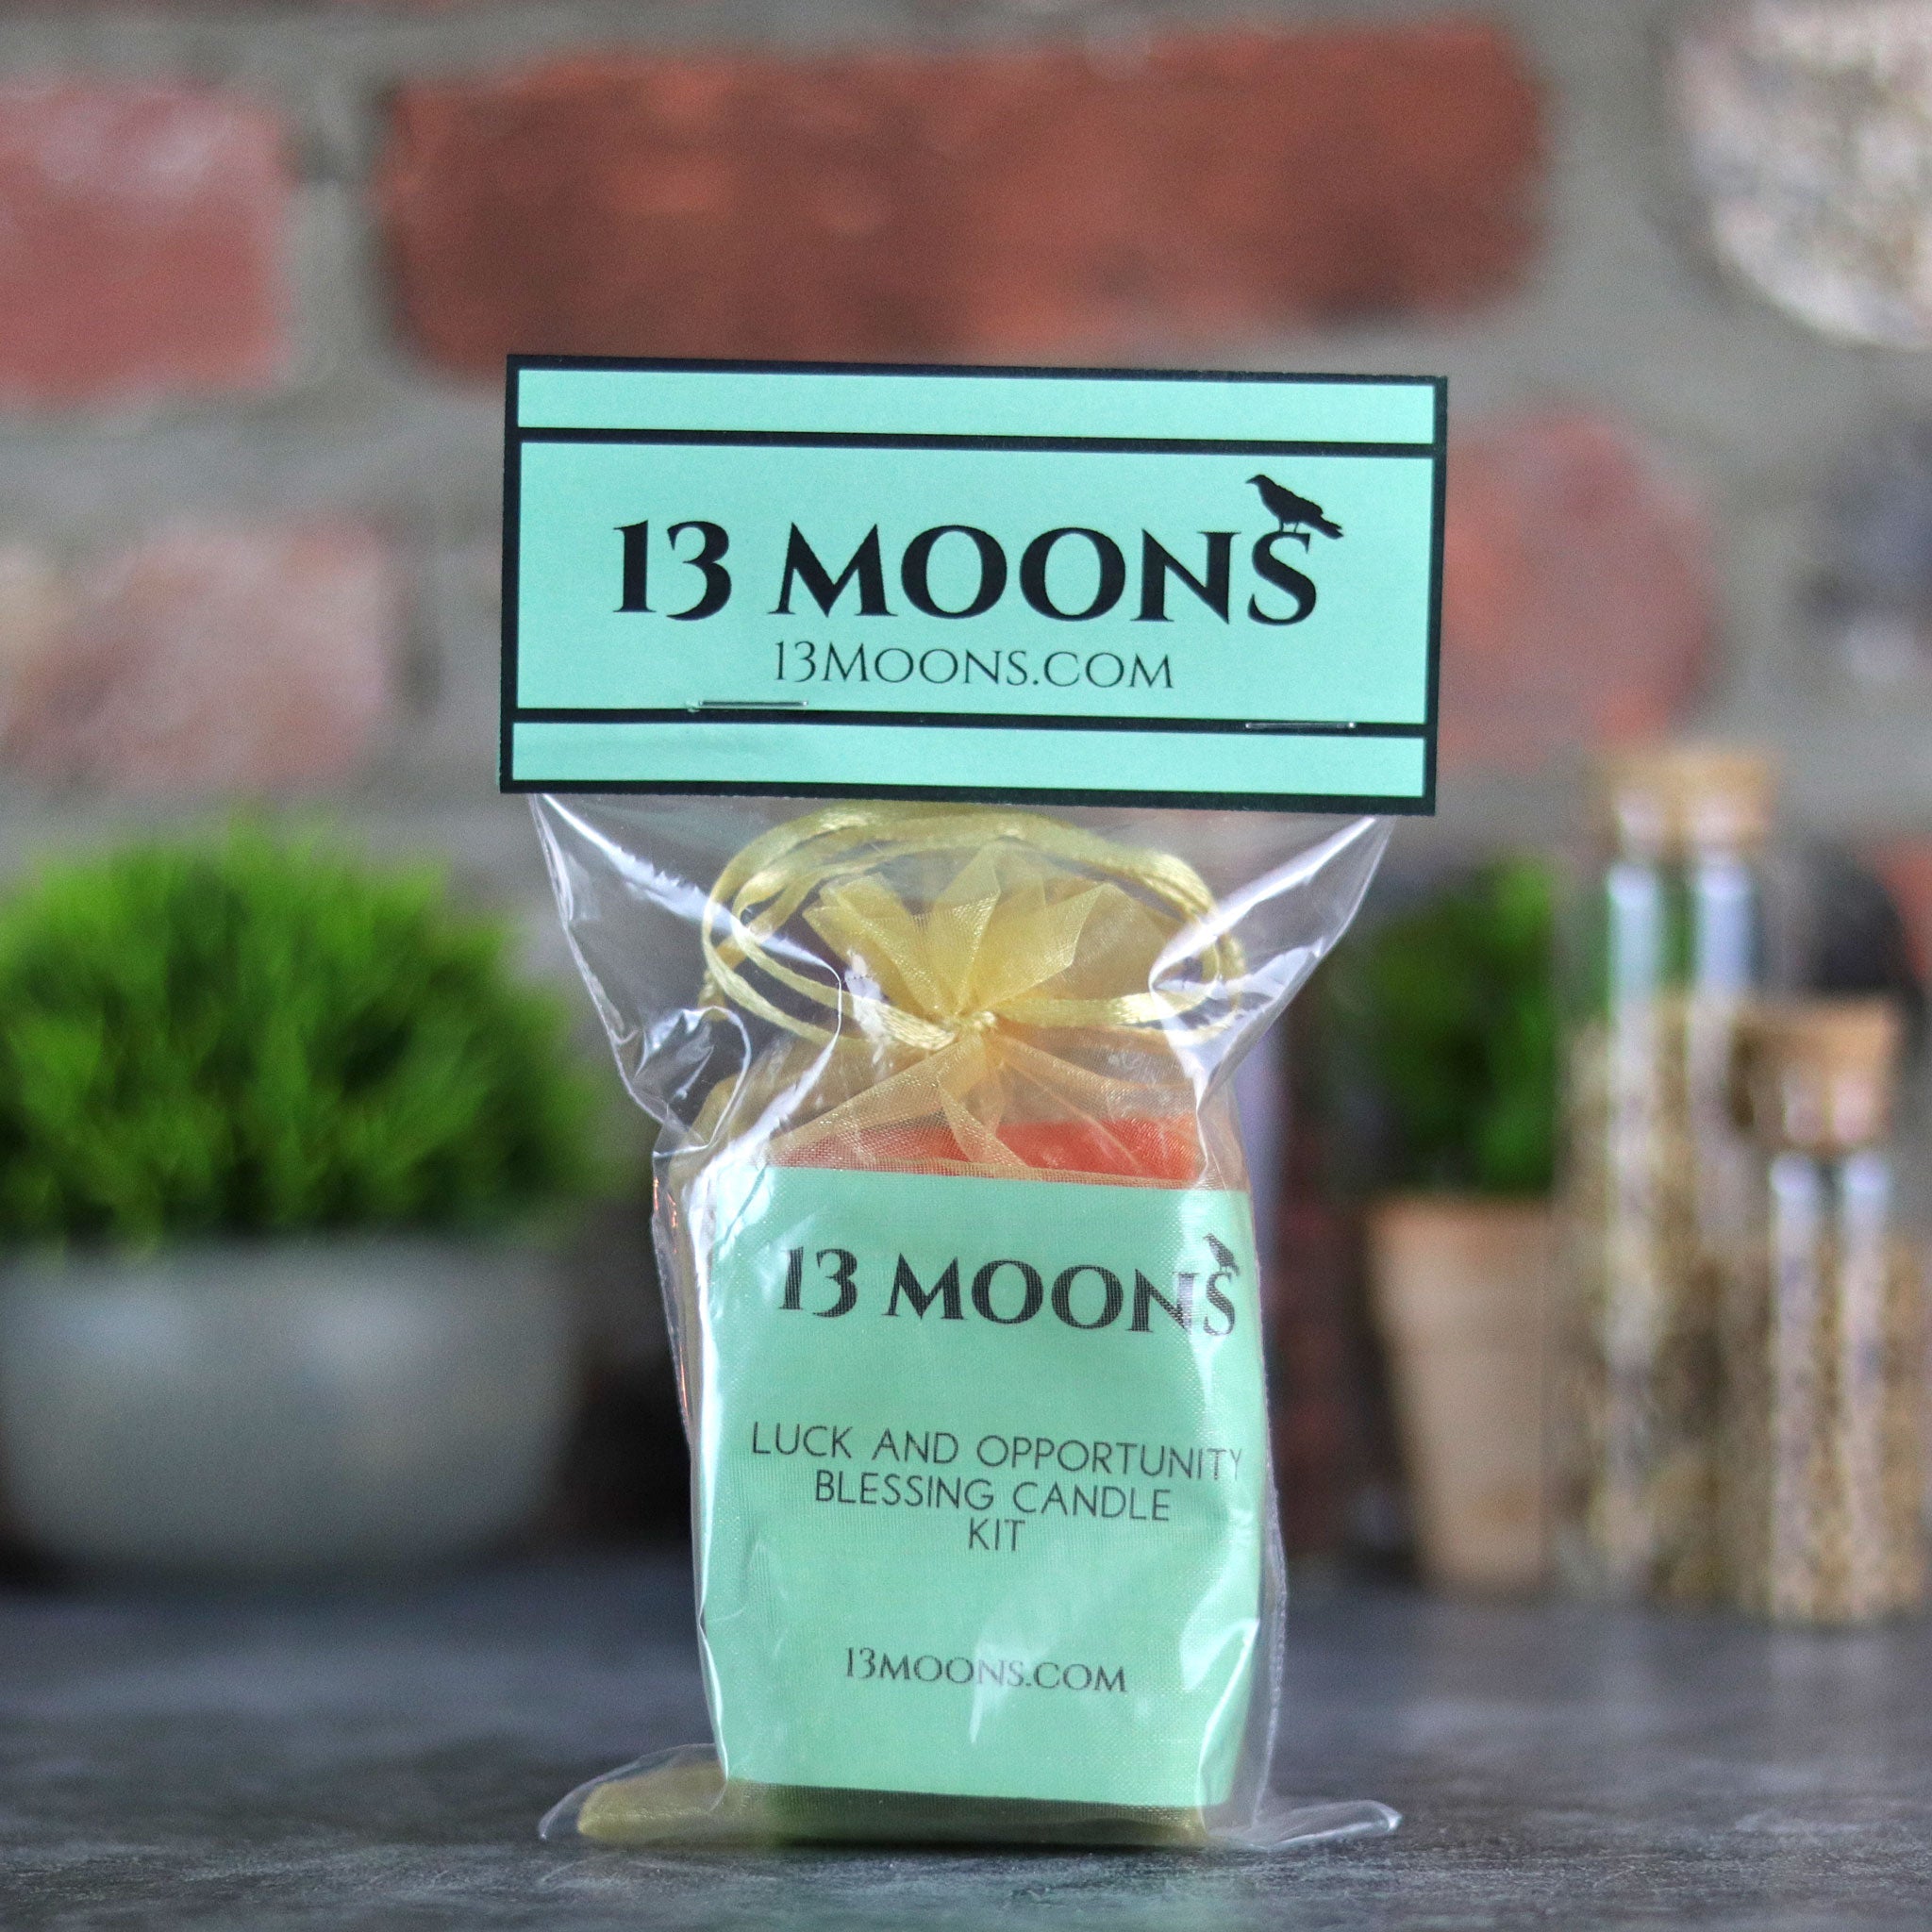 Luck and Opportunity Blessing Candle Kit - 13 Moons